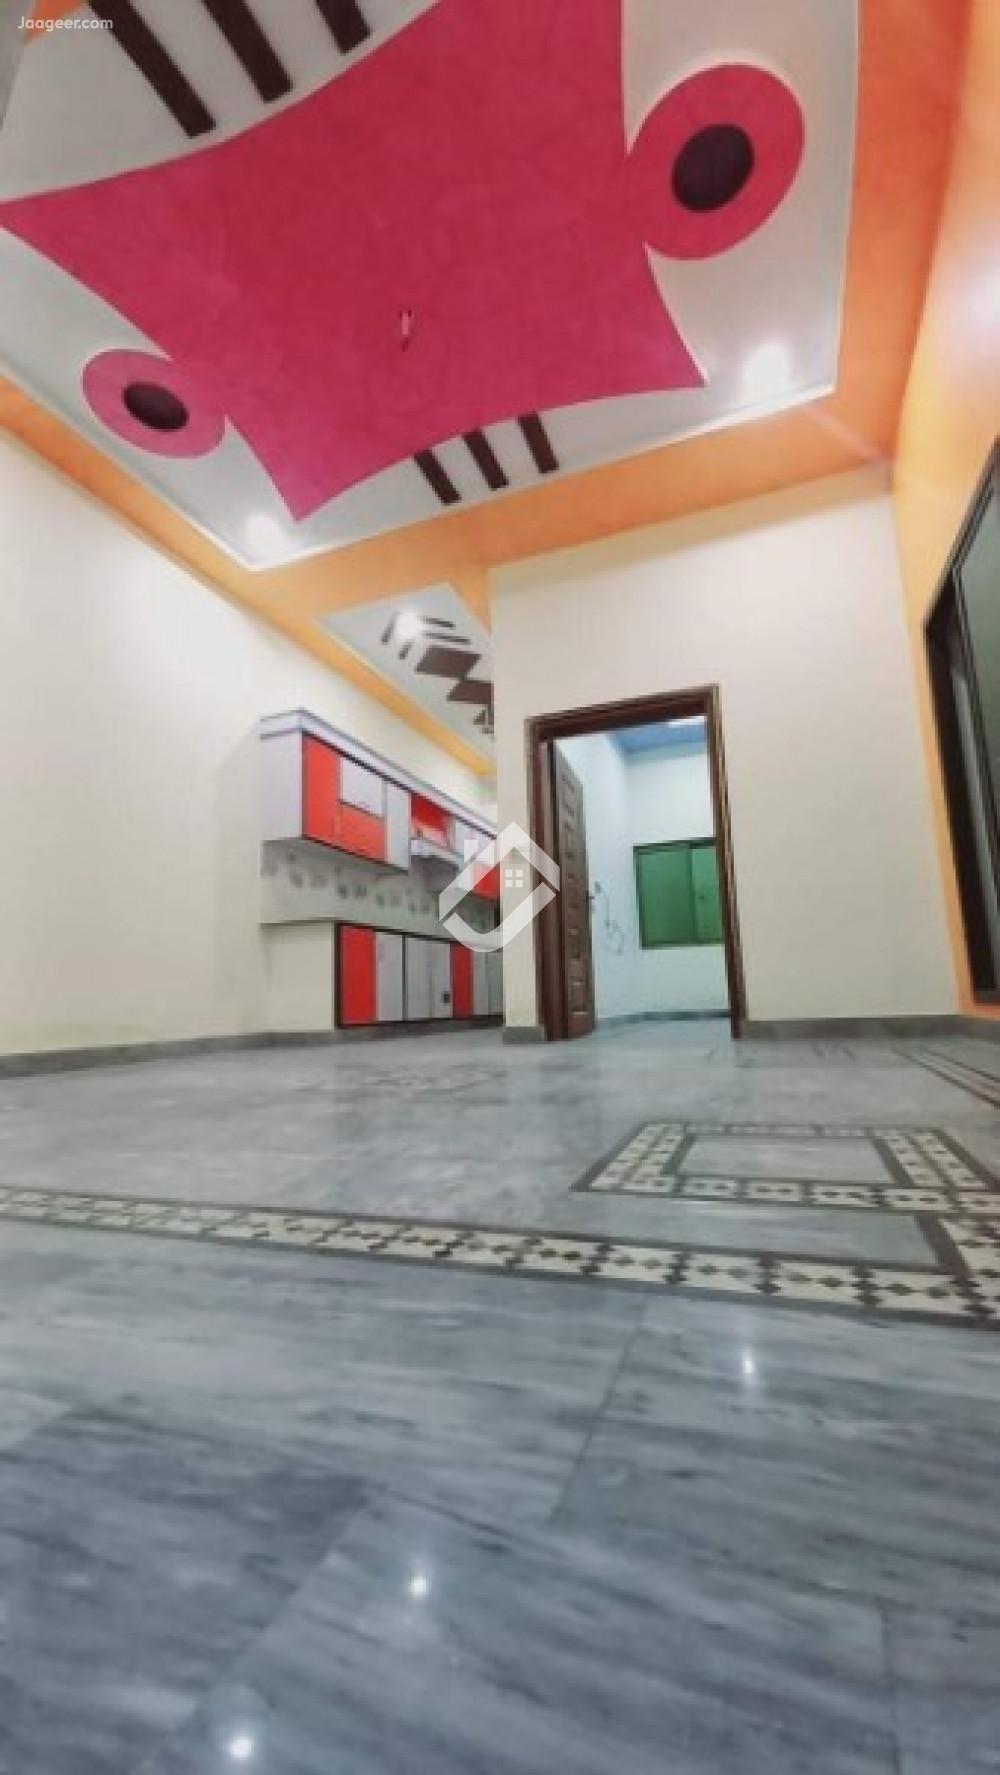 View  5 Marla Double Storey House For Sale In Muradabad Colony Near Daewoo Bus Station in Muradabad Colony, Sargodha